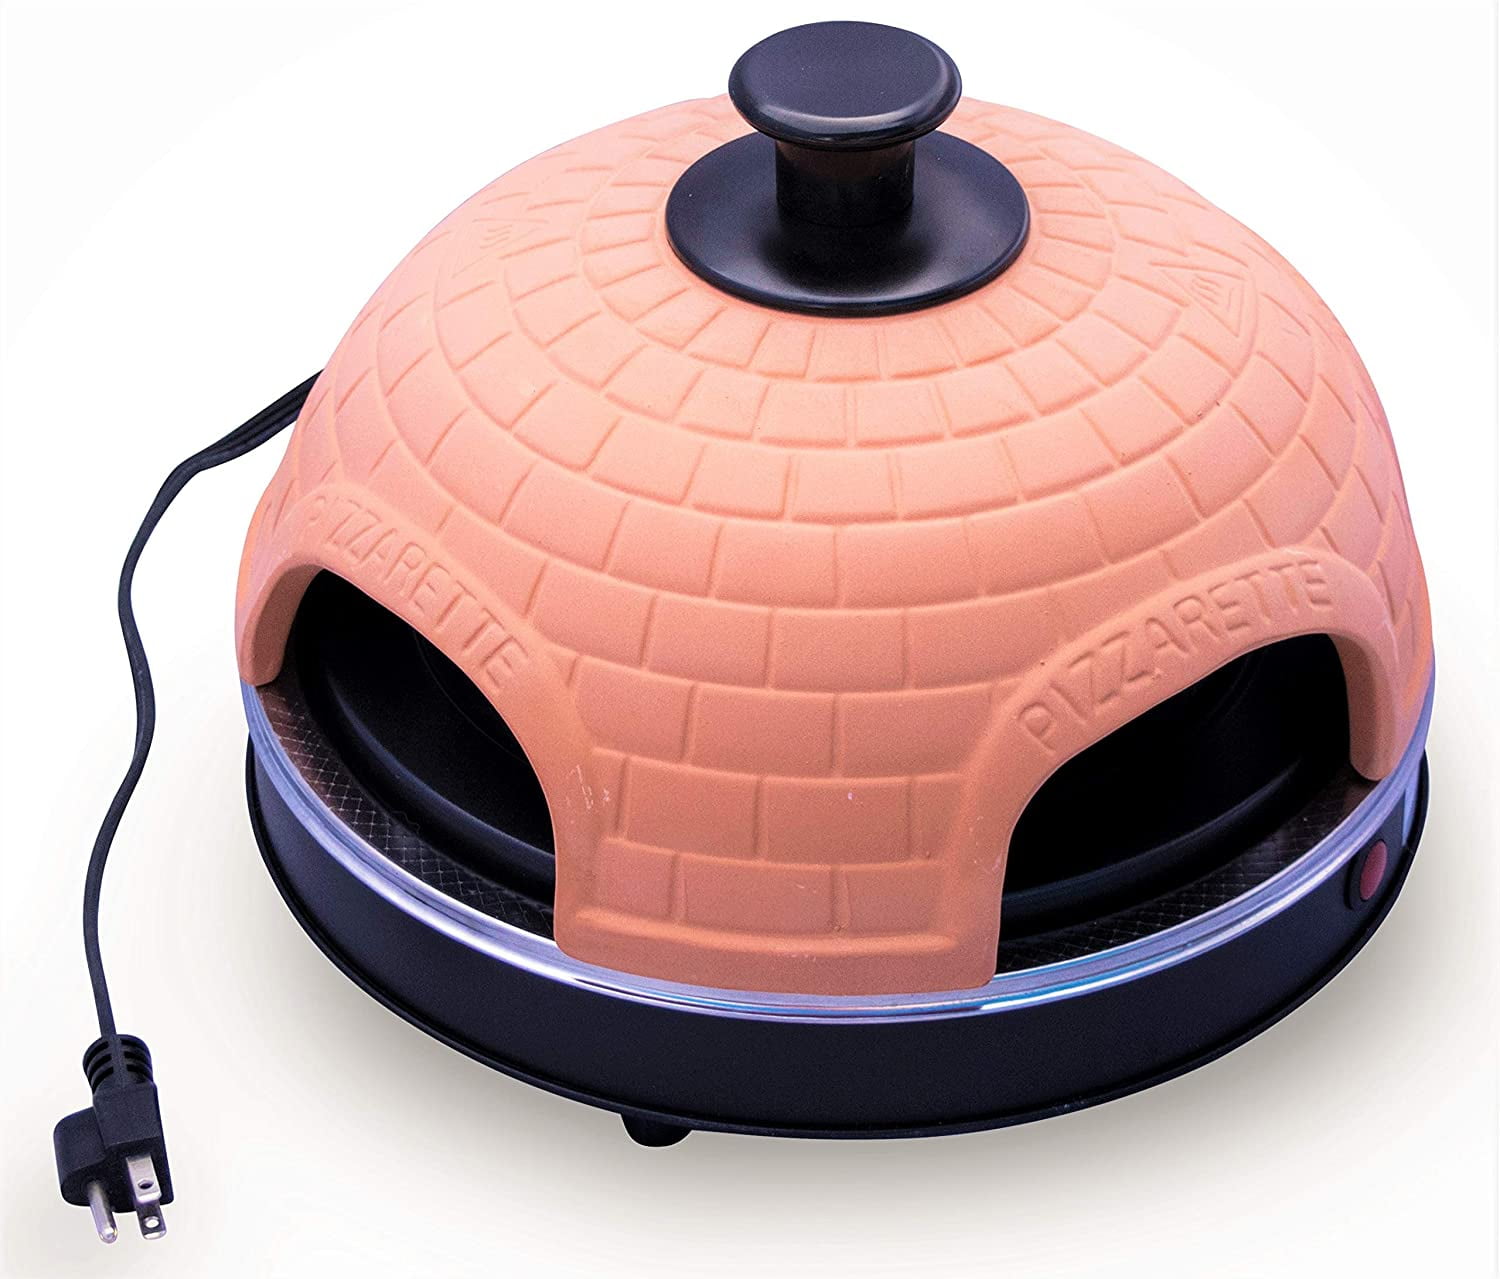 The World's Funnest Pizza Oven” – 6 Person Model - Countertop Pizza Oven – Europe's Fav Tabletop Mini Pizza Now Available In The USA – Dual Heating Elements - Walmart.com